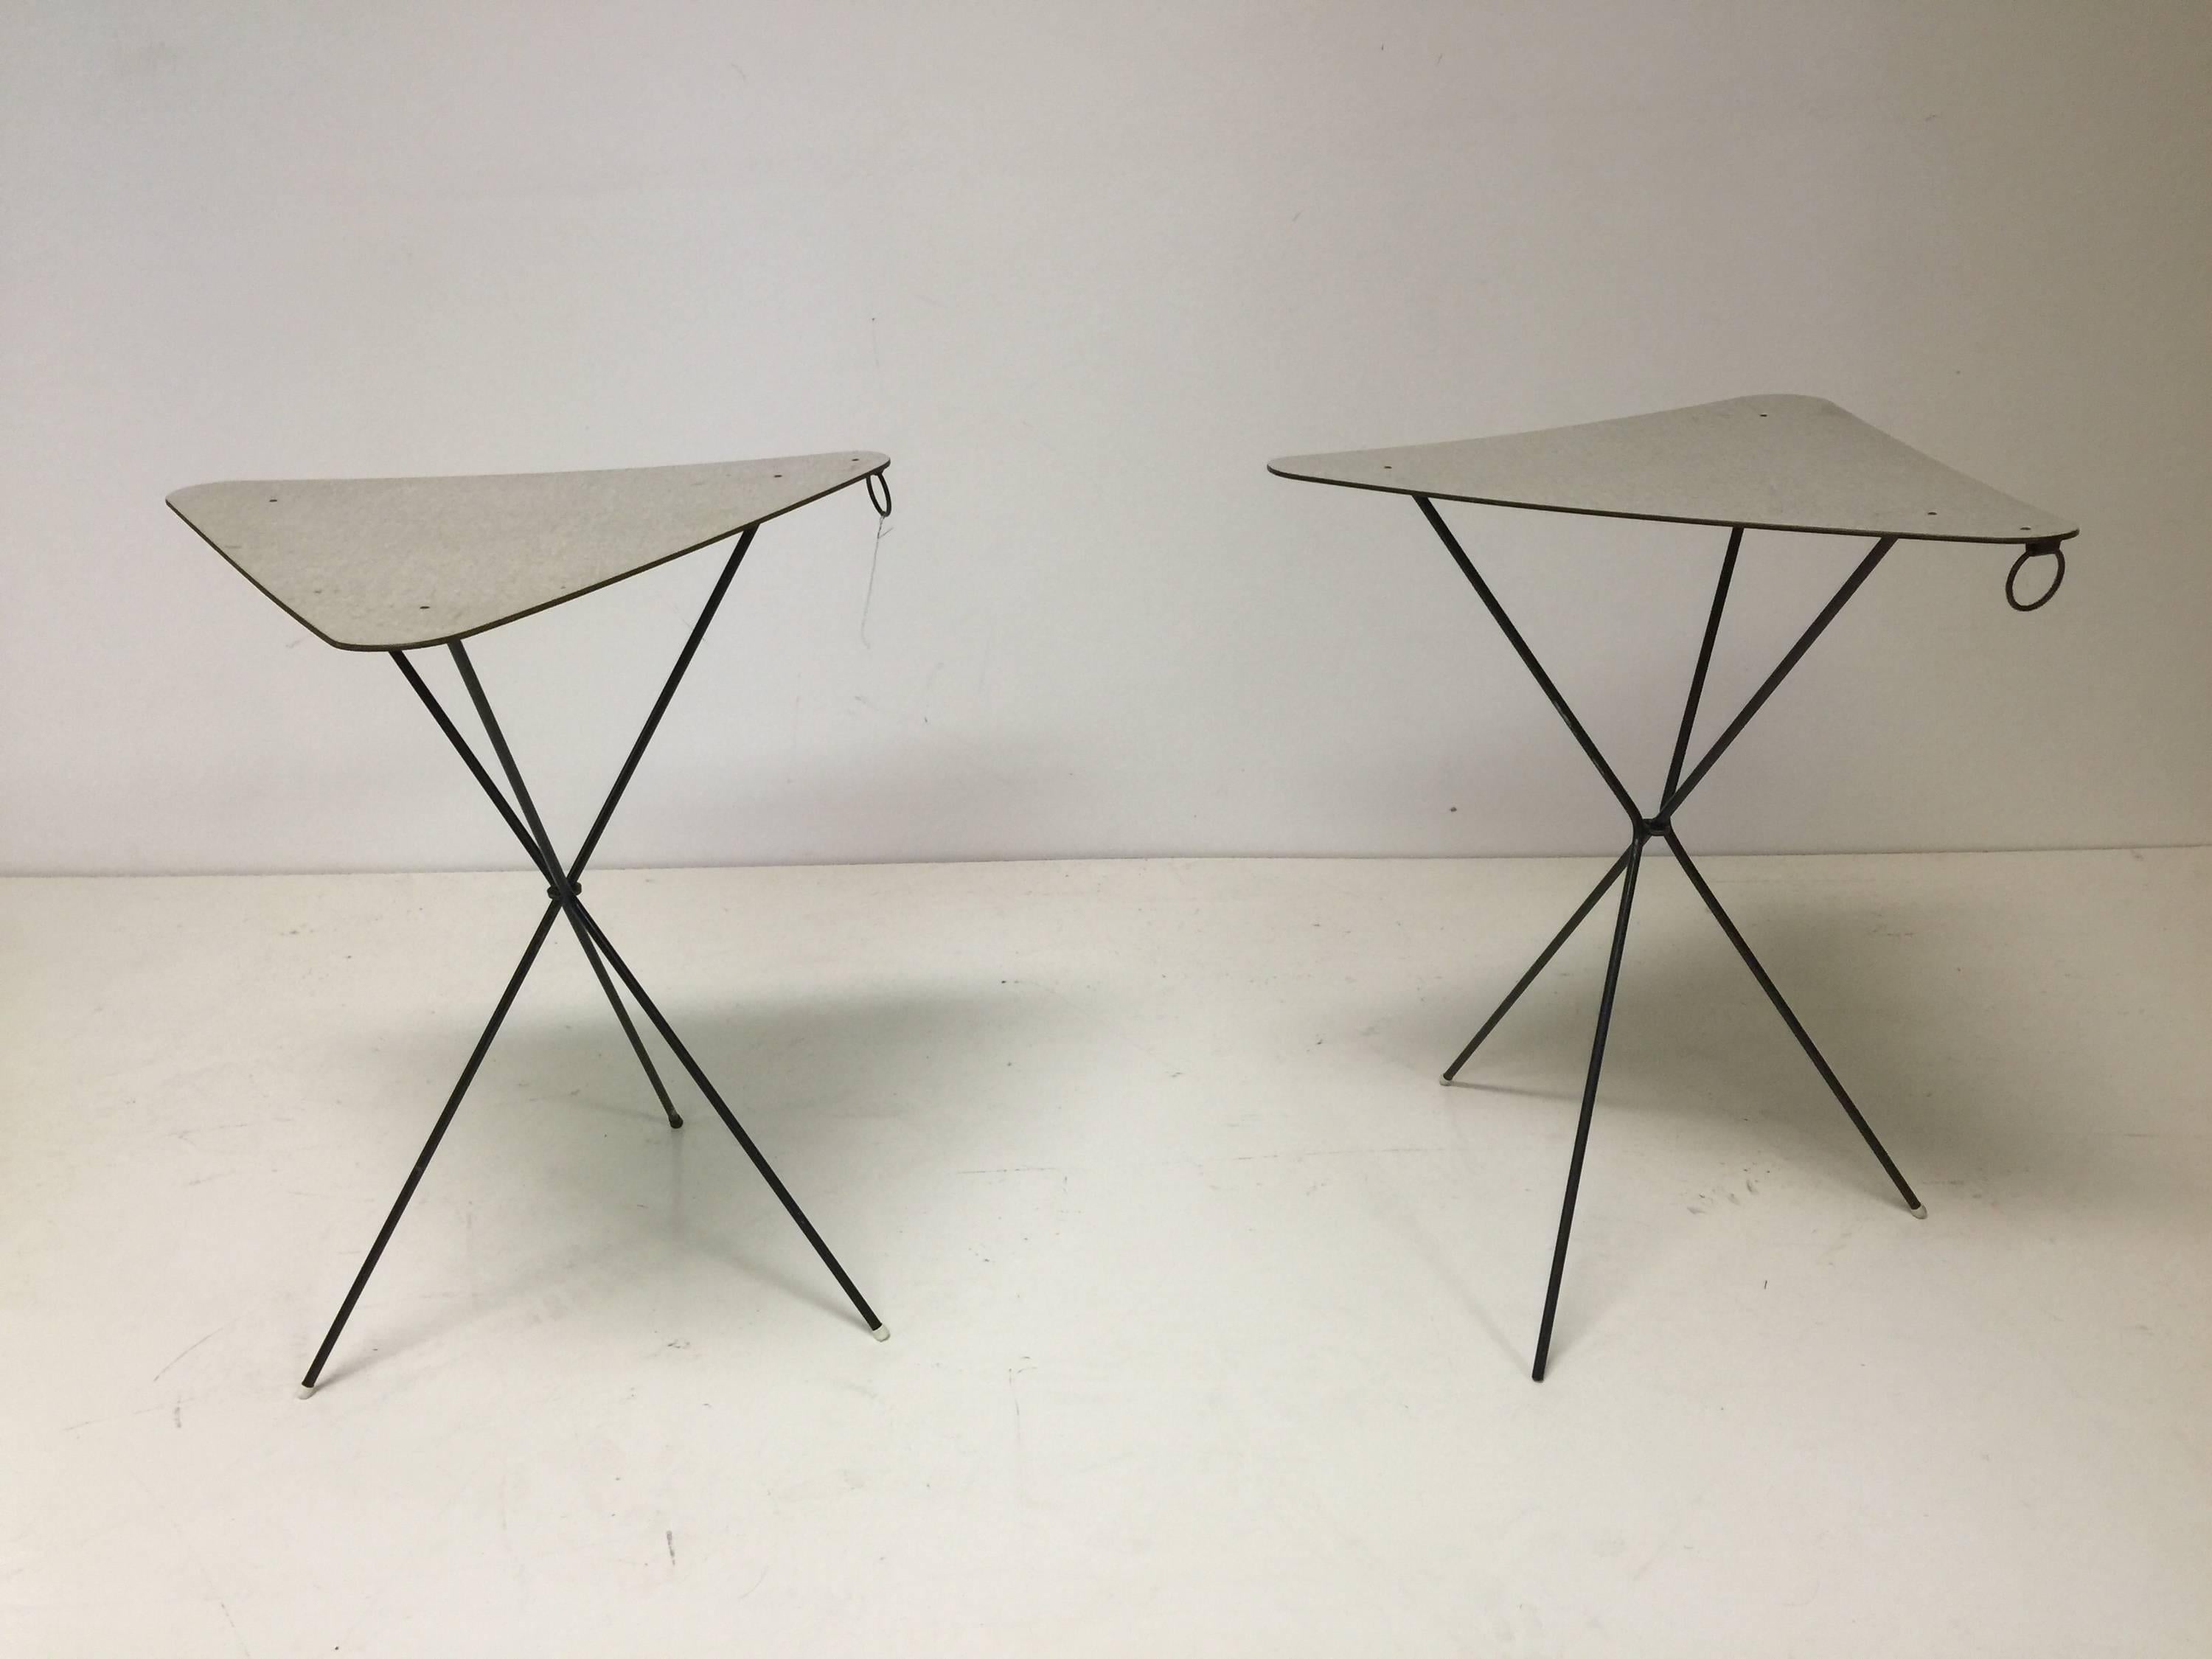 A pair of French, 1950s triangular cocktail tables by Mathieu Matégot with formica tops and black enameled iron tripod legs. The tables fold up for easy carrying with attached rings.